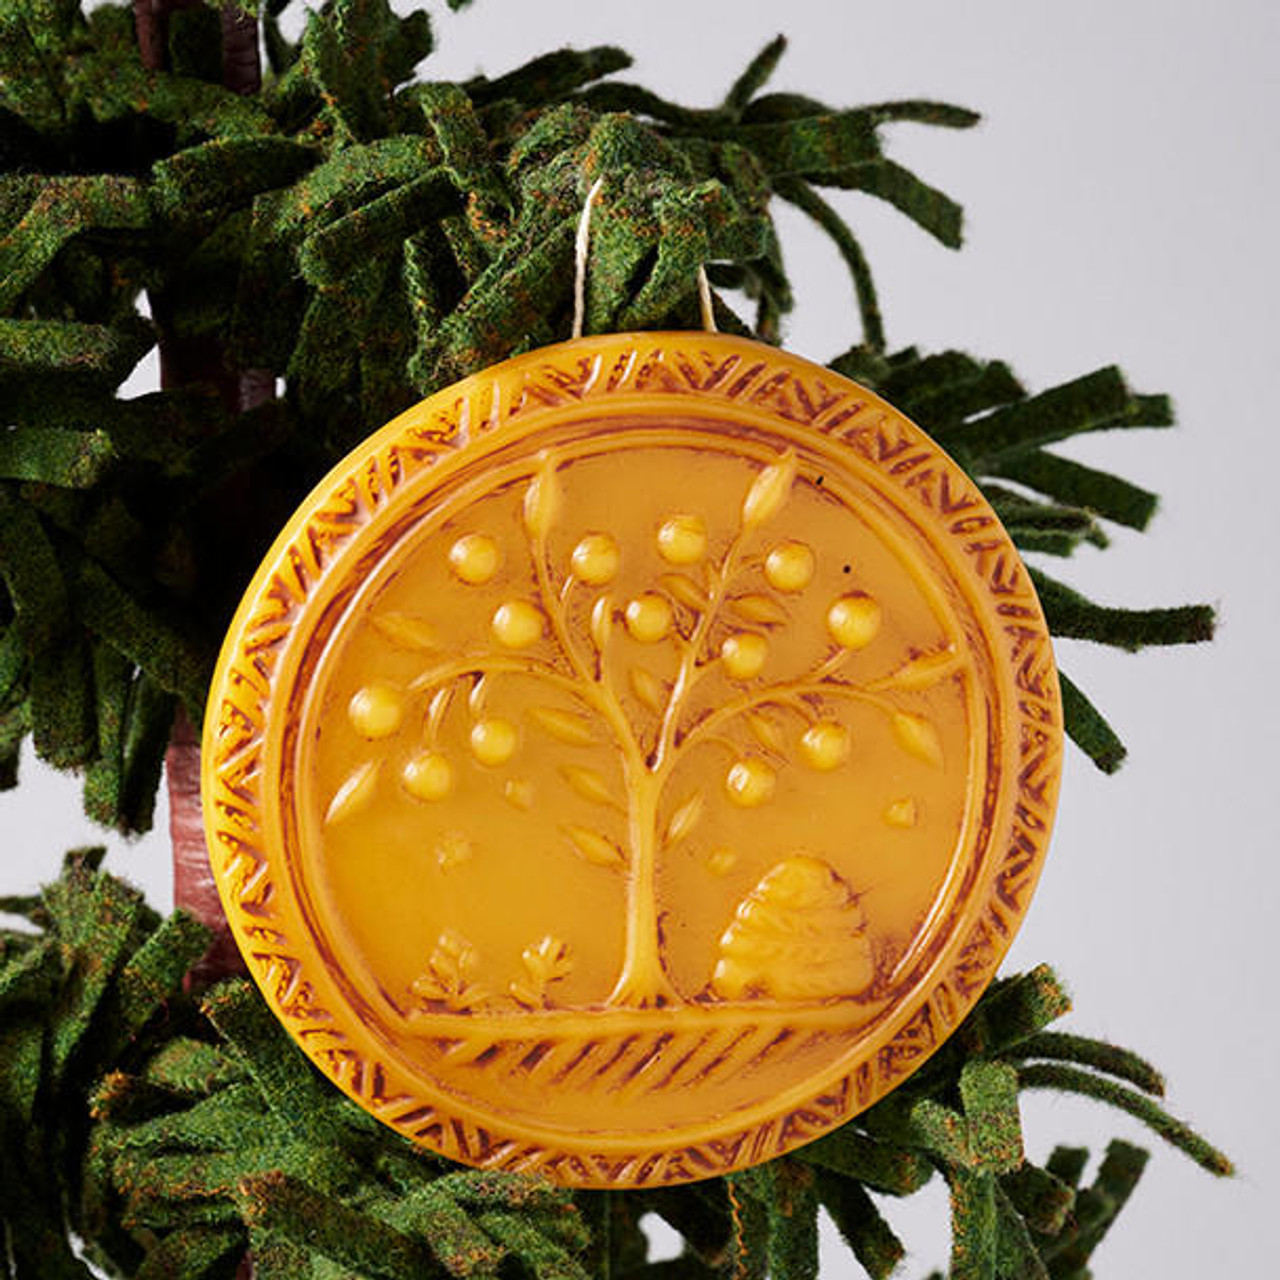 Cast Beeswax Ornaments